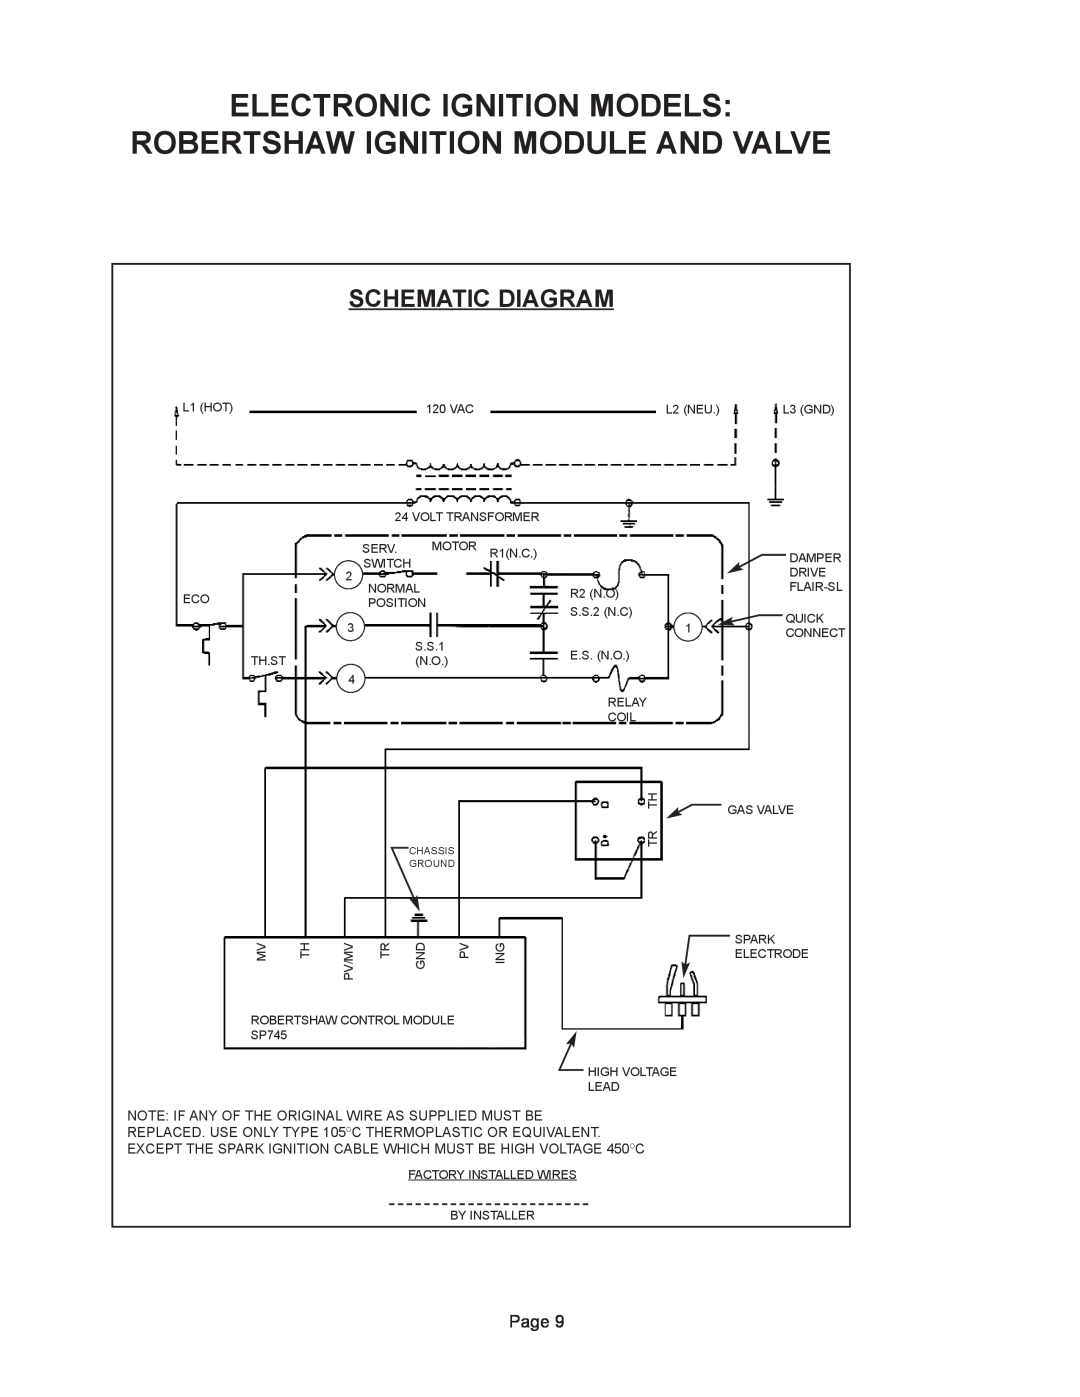 GSW G65 instruction manual Electronic Ignition Models, Robertshaw Ignition Module And Valve, Schematic Diagram 